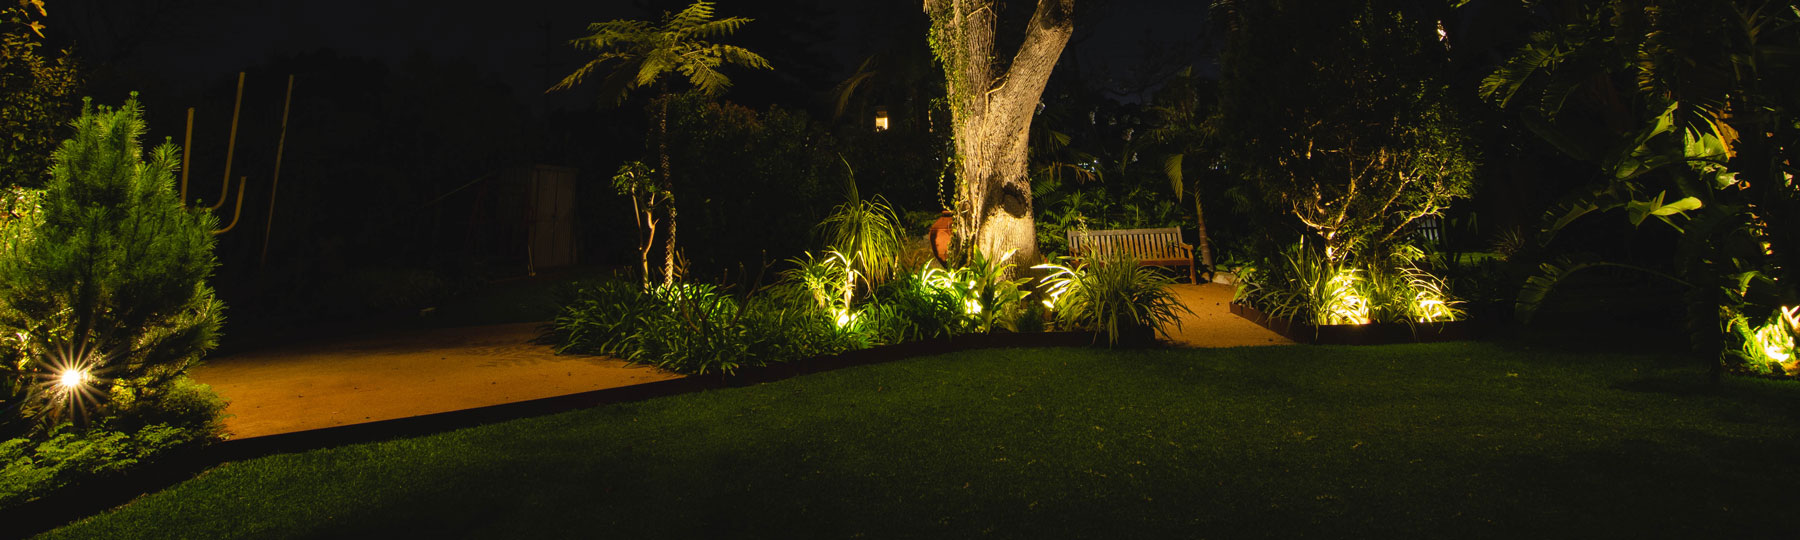 improve-your-home-security-with-garden-lights-header